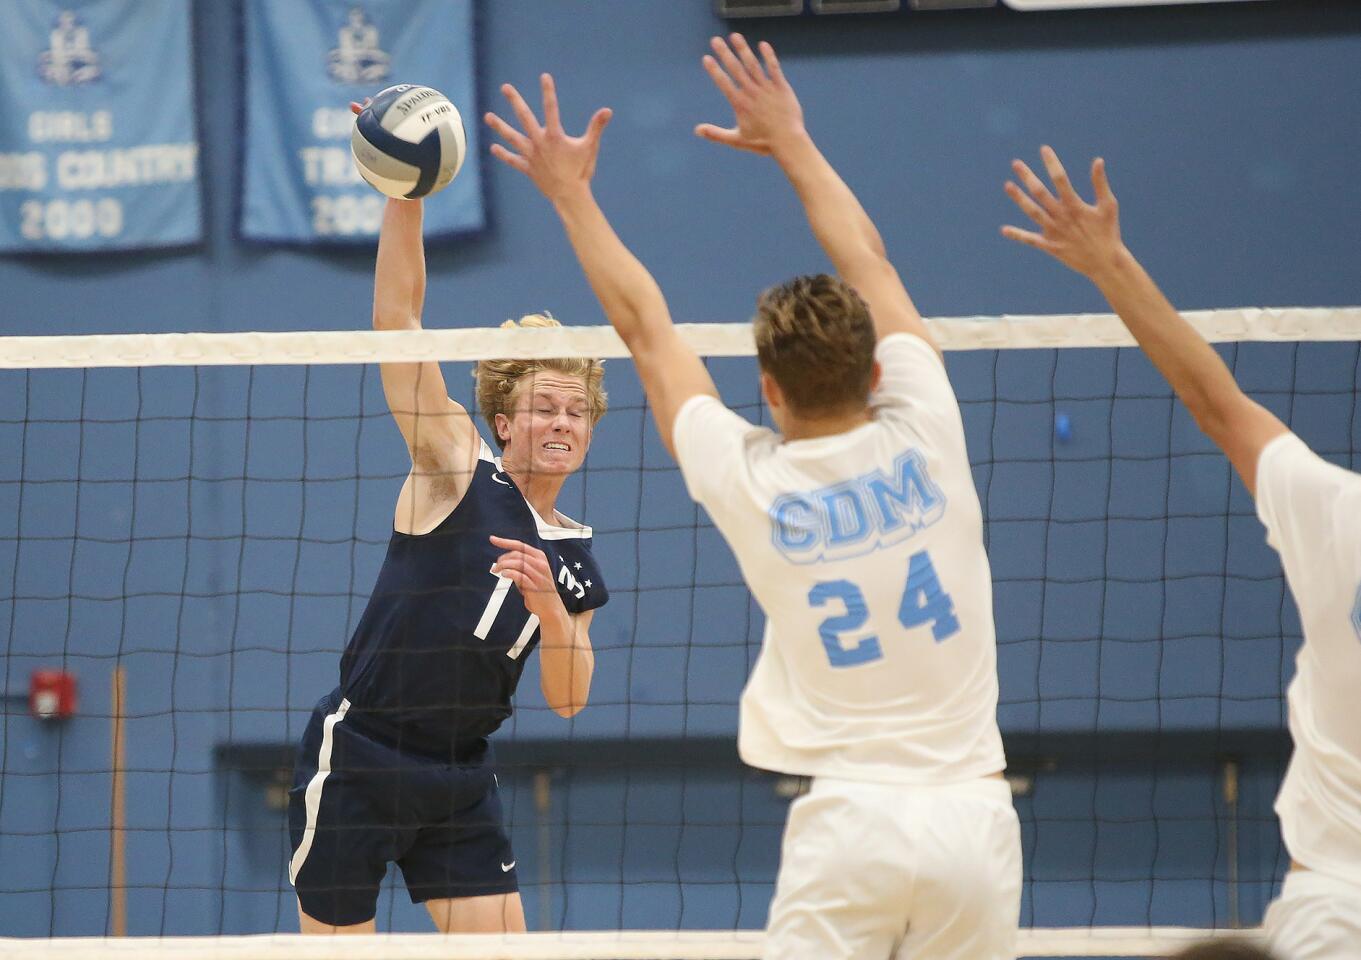 Newport Harbor's Jack Higgs (11) puts a kill past Corona Del Mar blockers Shane Premer (24) Glen Linden (11) during second round of the Battle of the Bay boys' volleyball match in Surf League play on Wednesday.